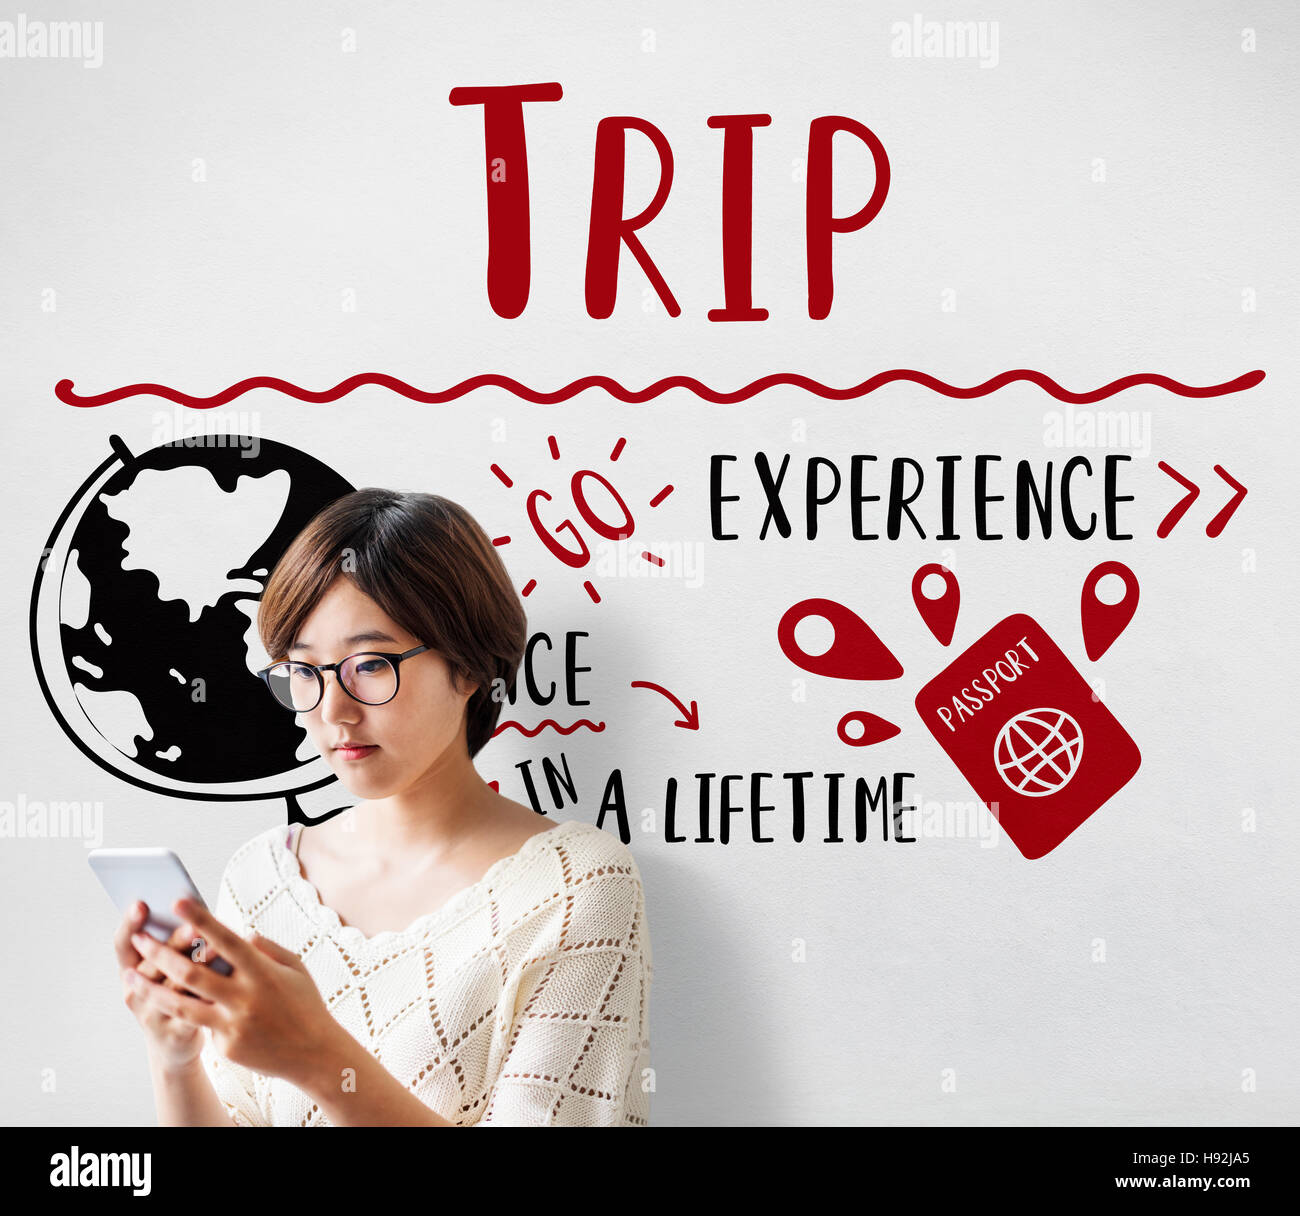 Holiday Travel Voyage Vacation Trip Concept Stock Photo